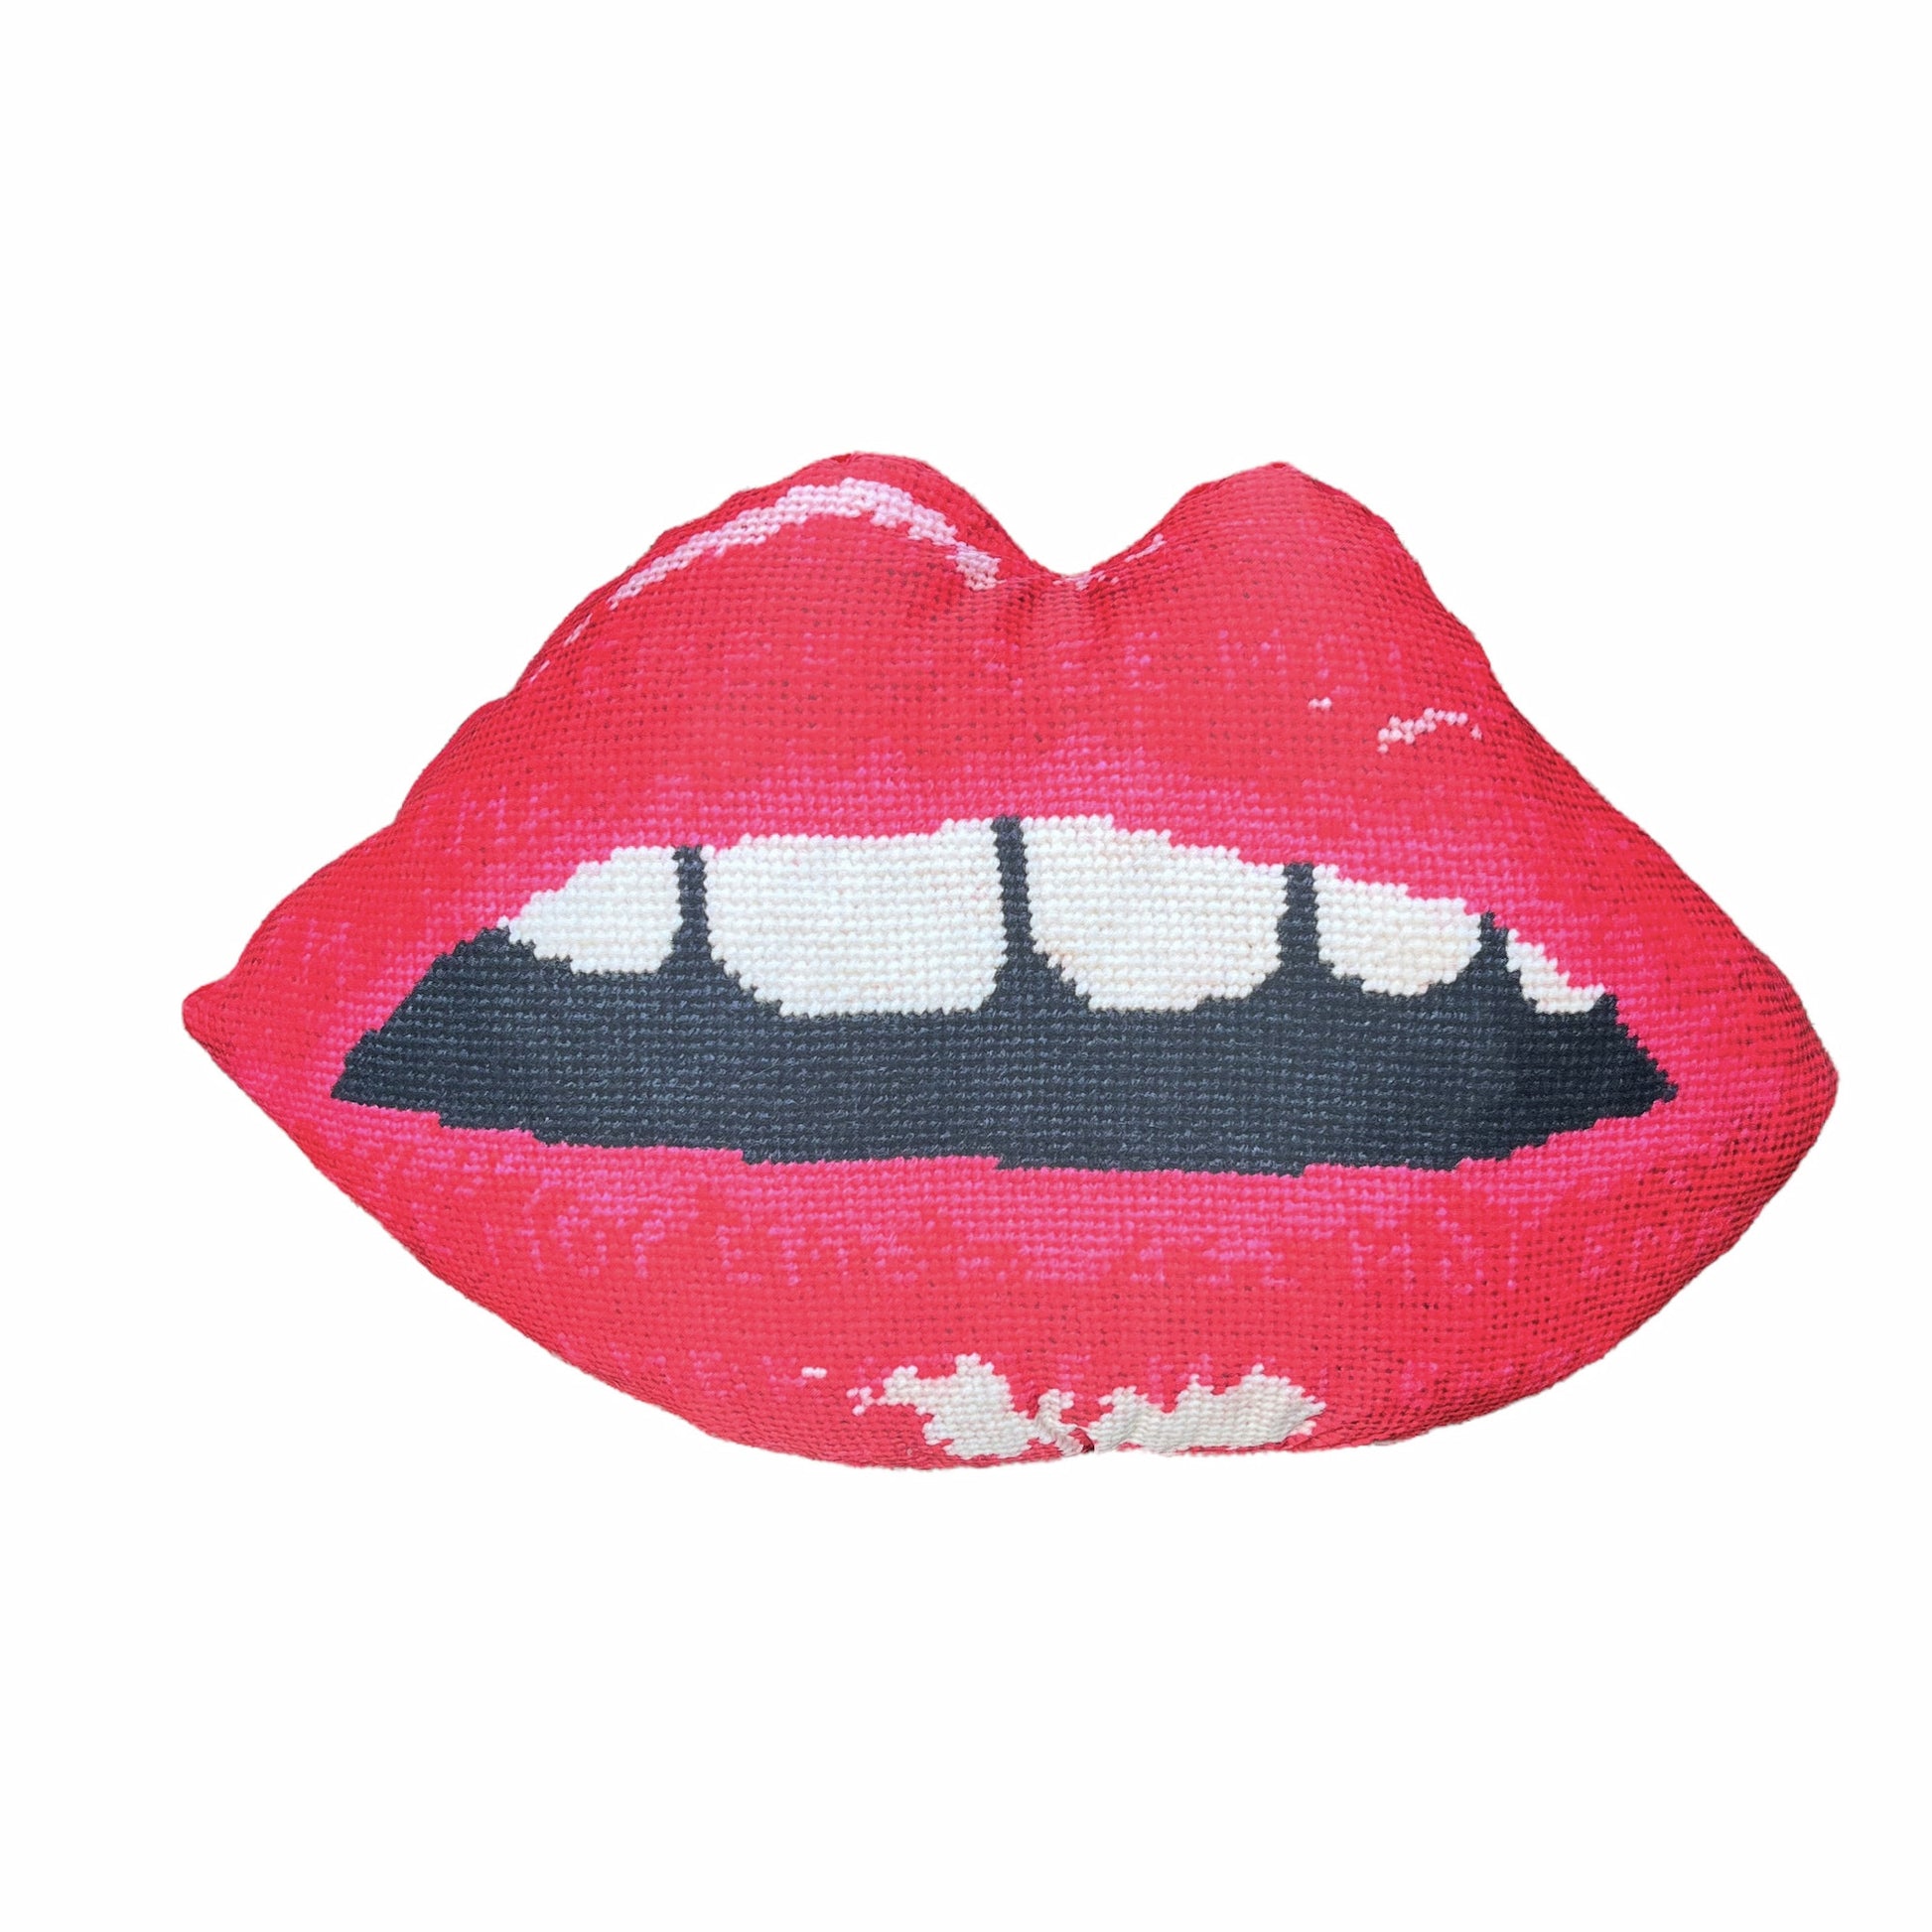 Sculpted red lips pillow features red lips with open mouth & gapped teeth. Featured on Disney+ High School Musical The Series